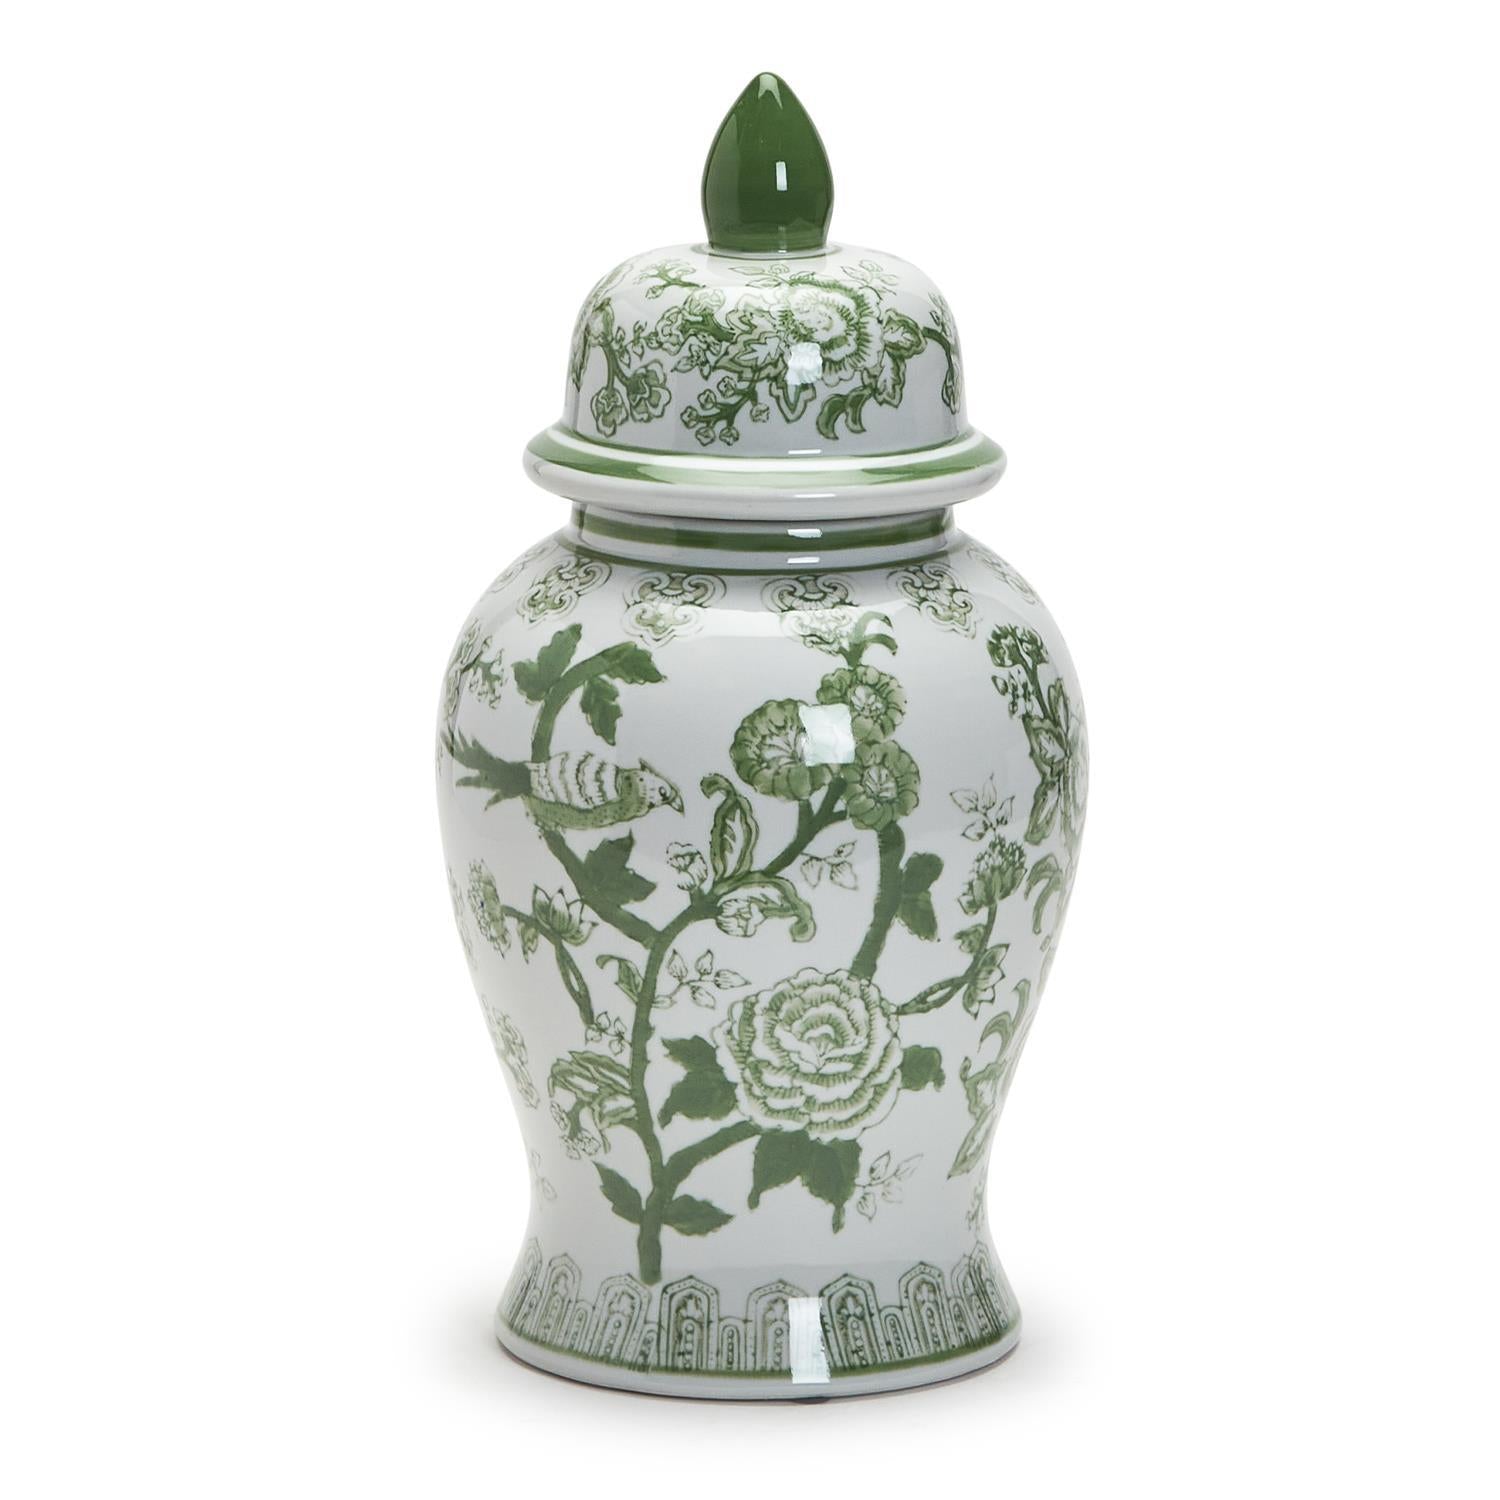 Green and White Covered Temple Jar